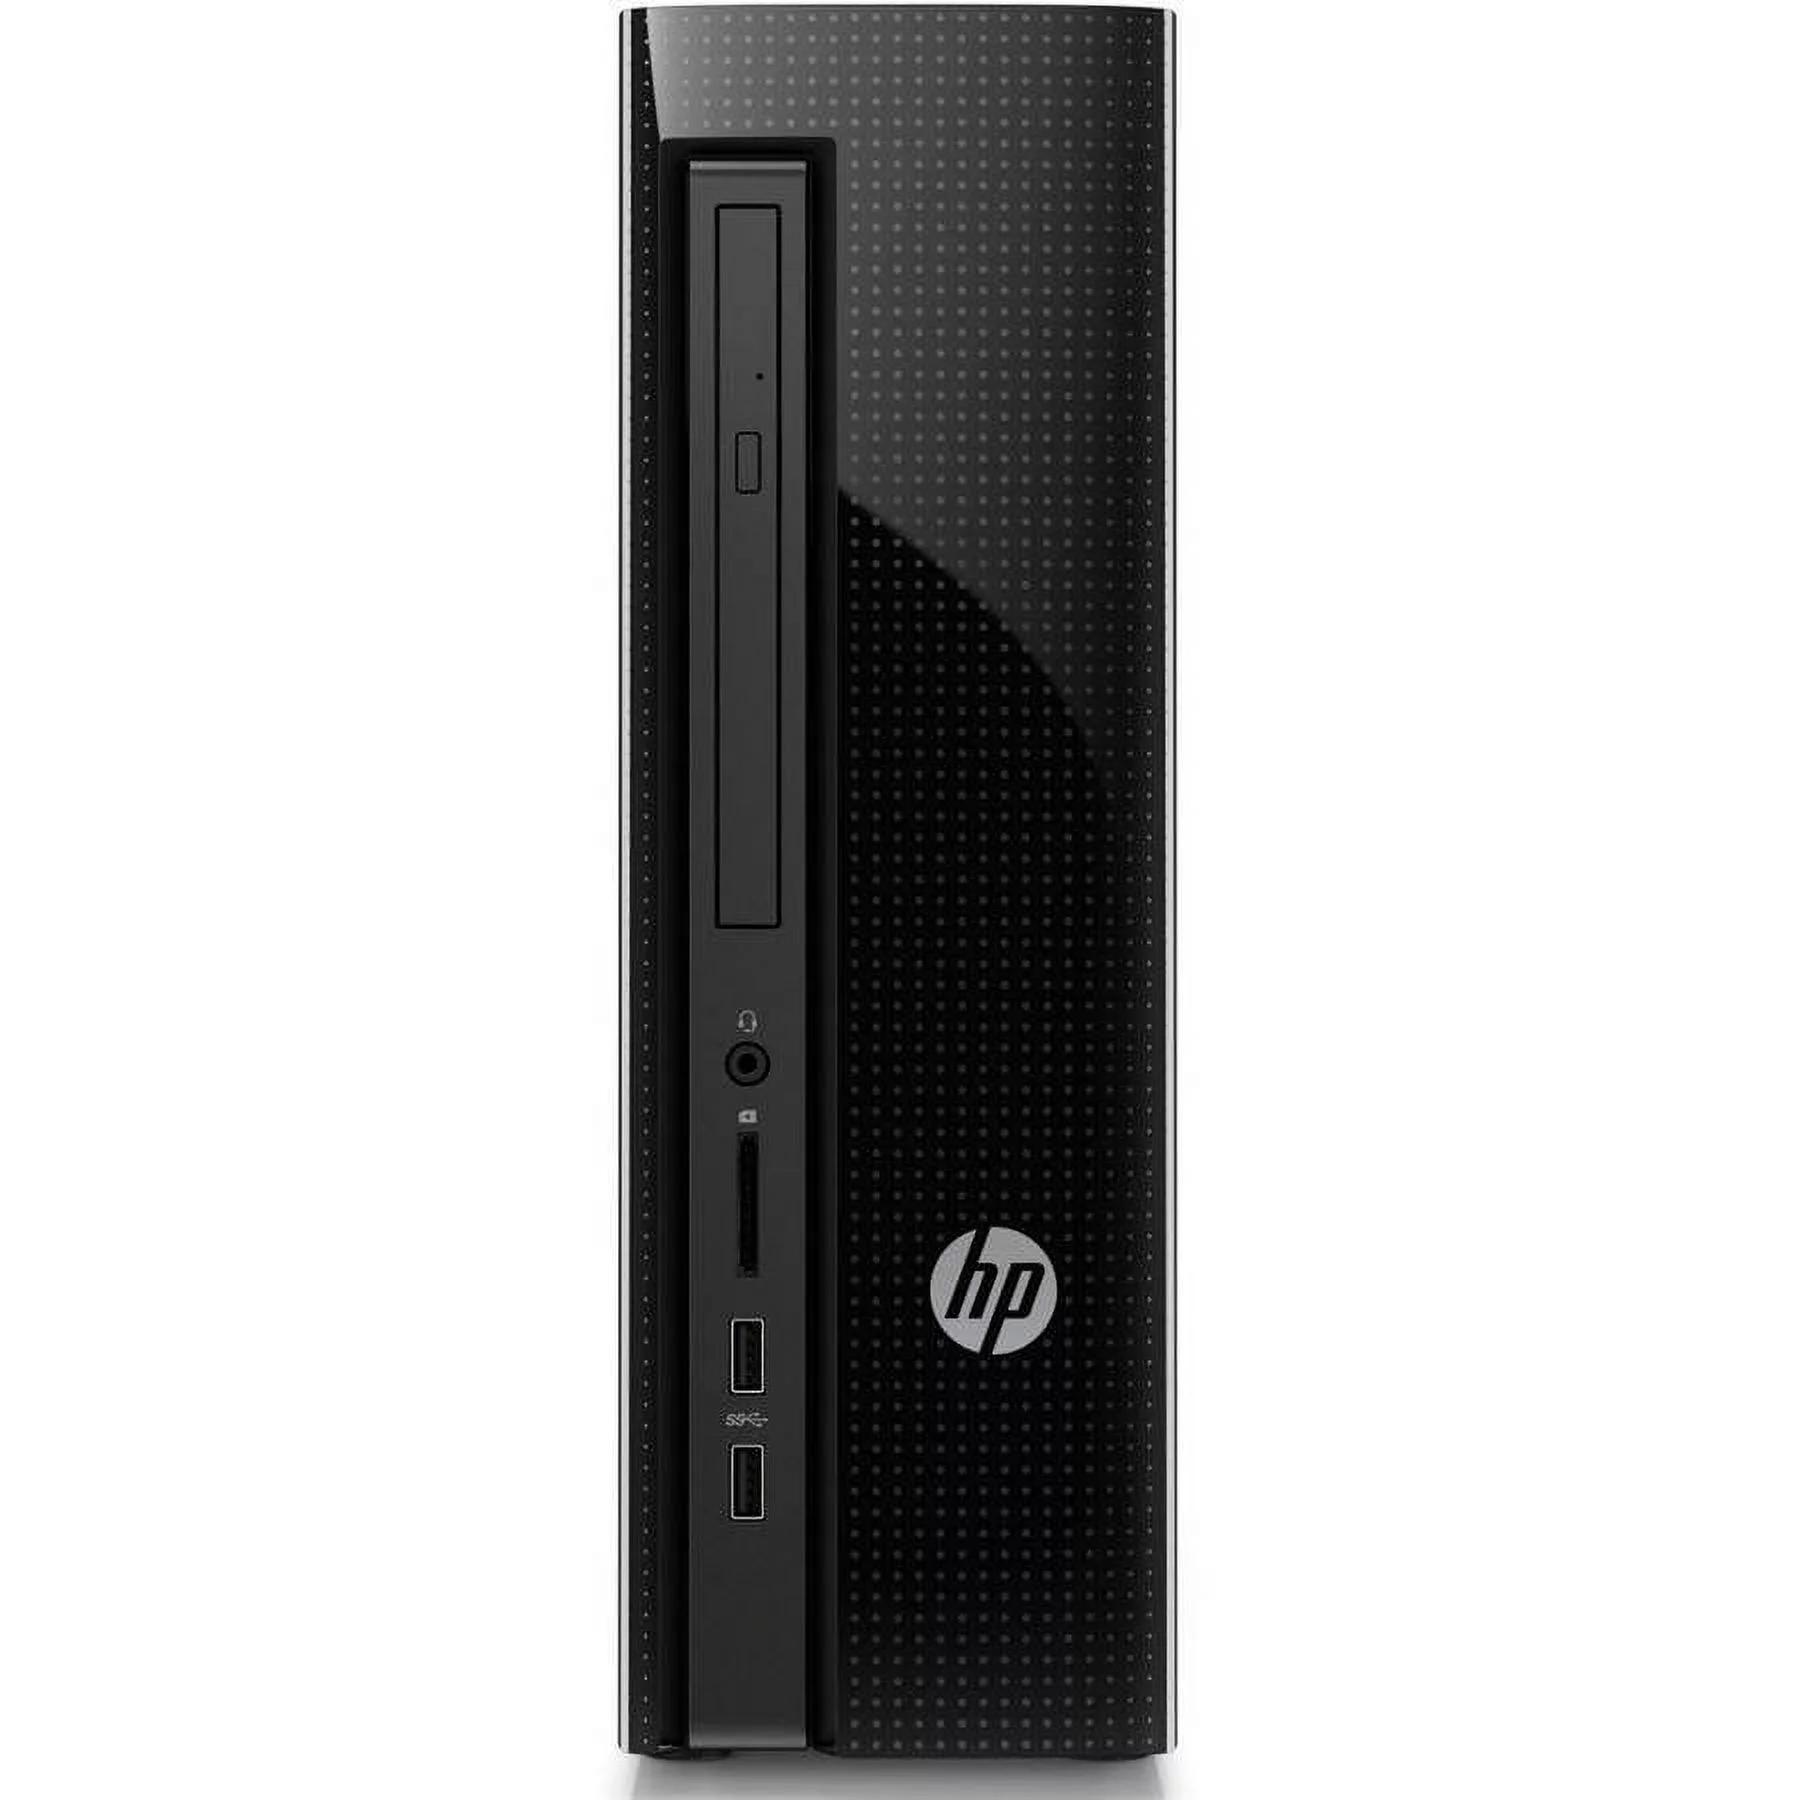 Hp 410 desktop: ultimate powerhouse for work and entertainment